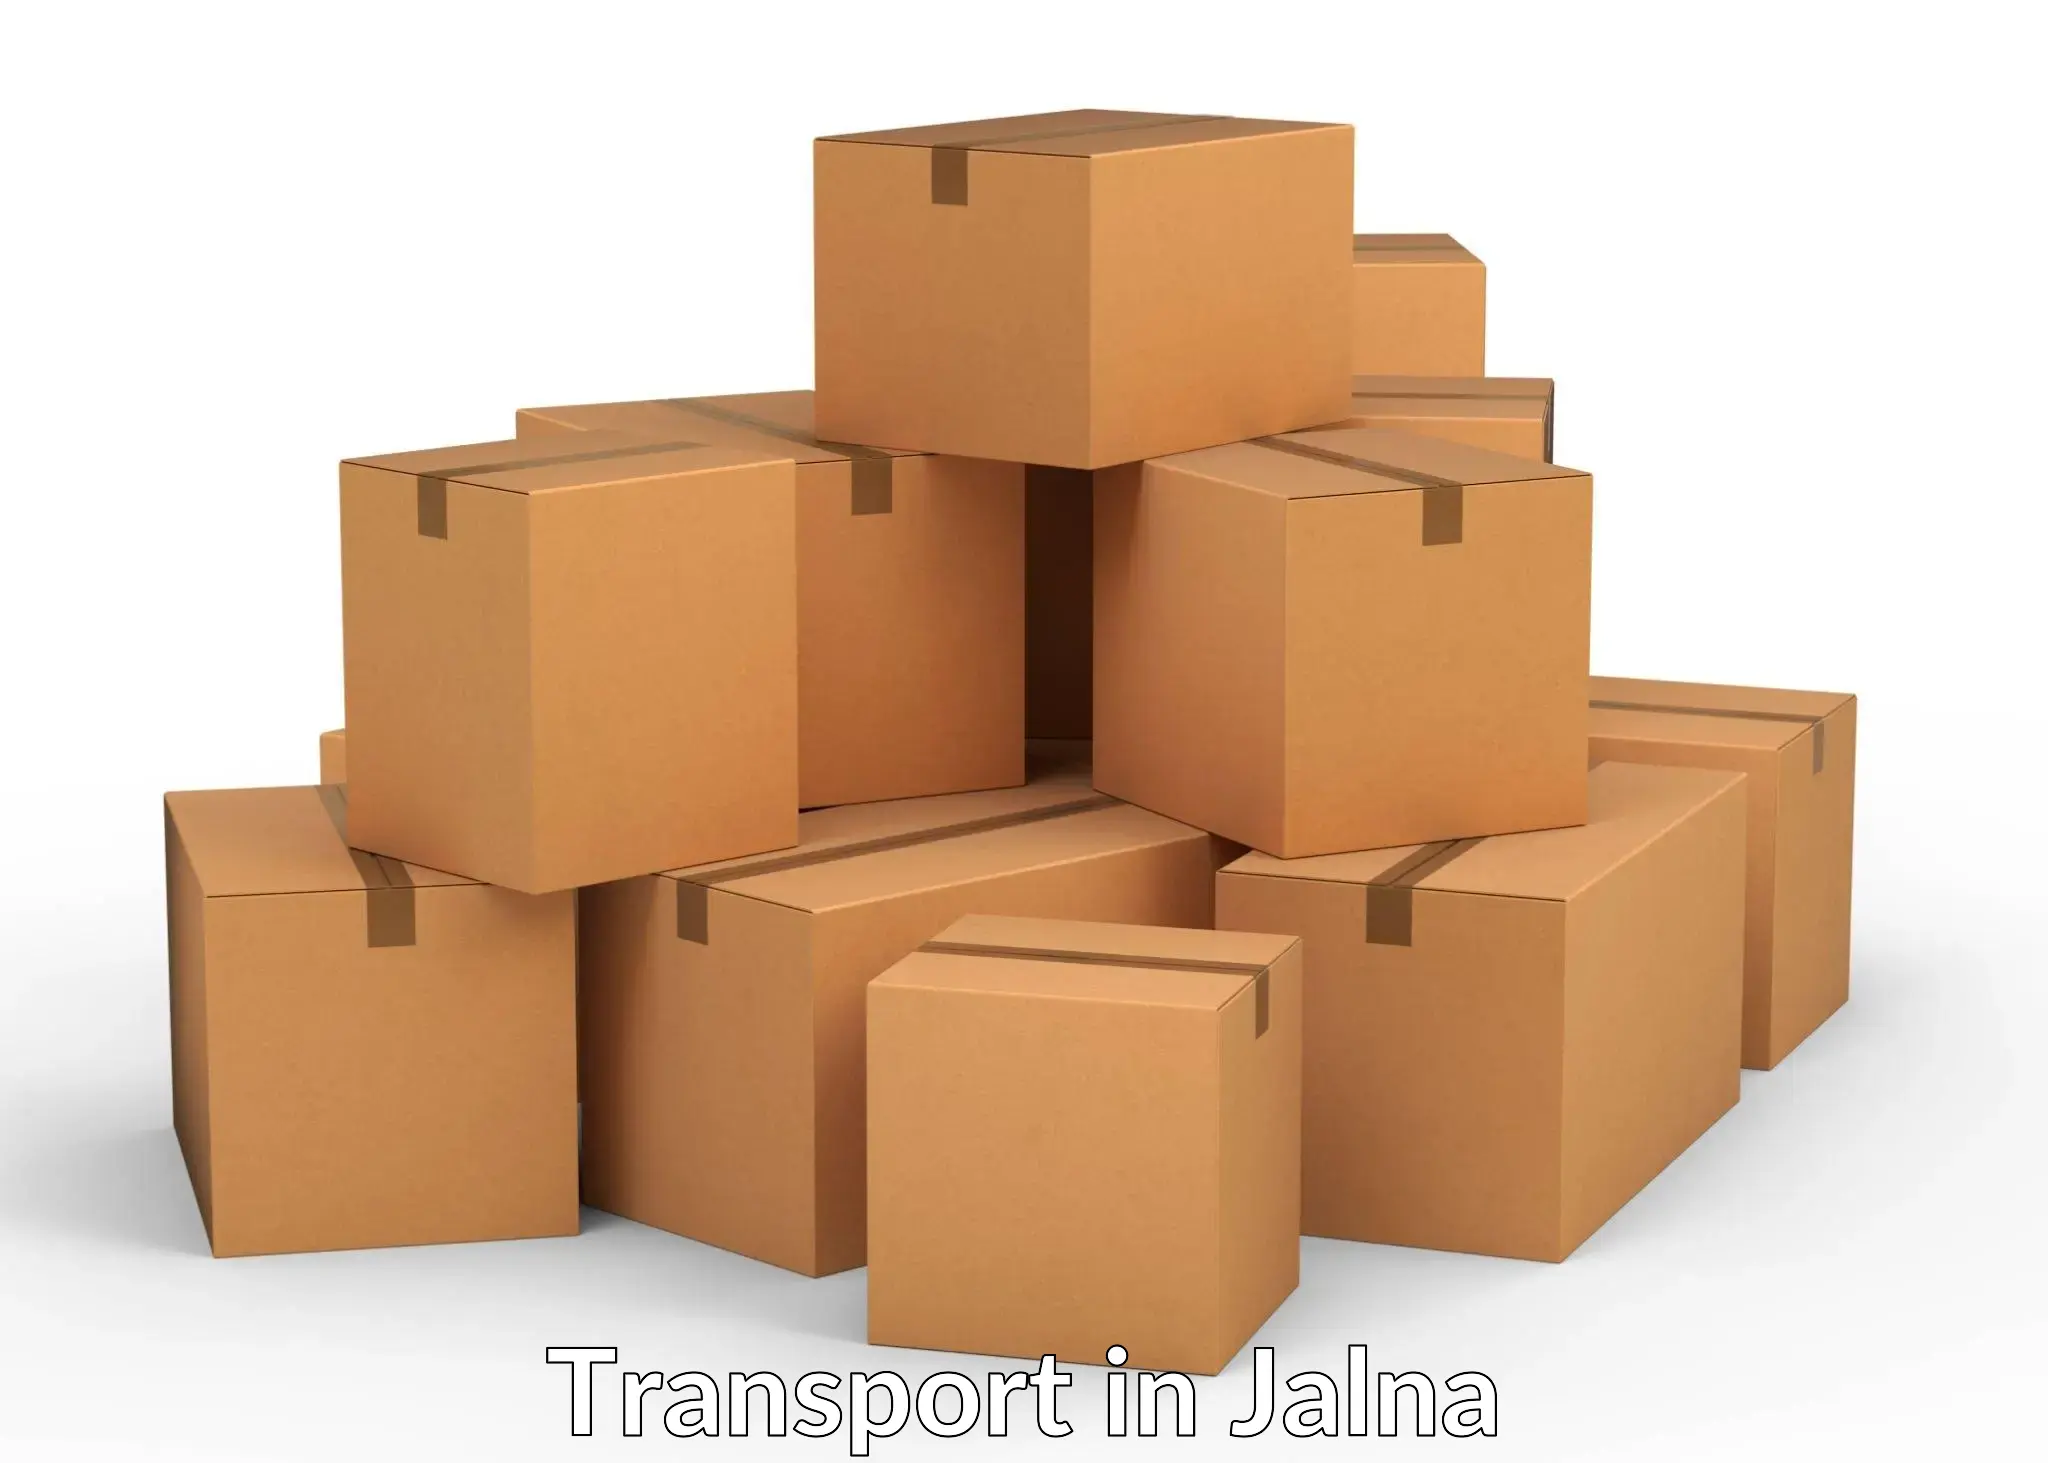 Container transport service in Jalna